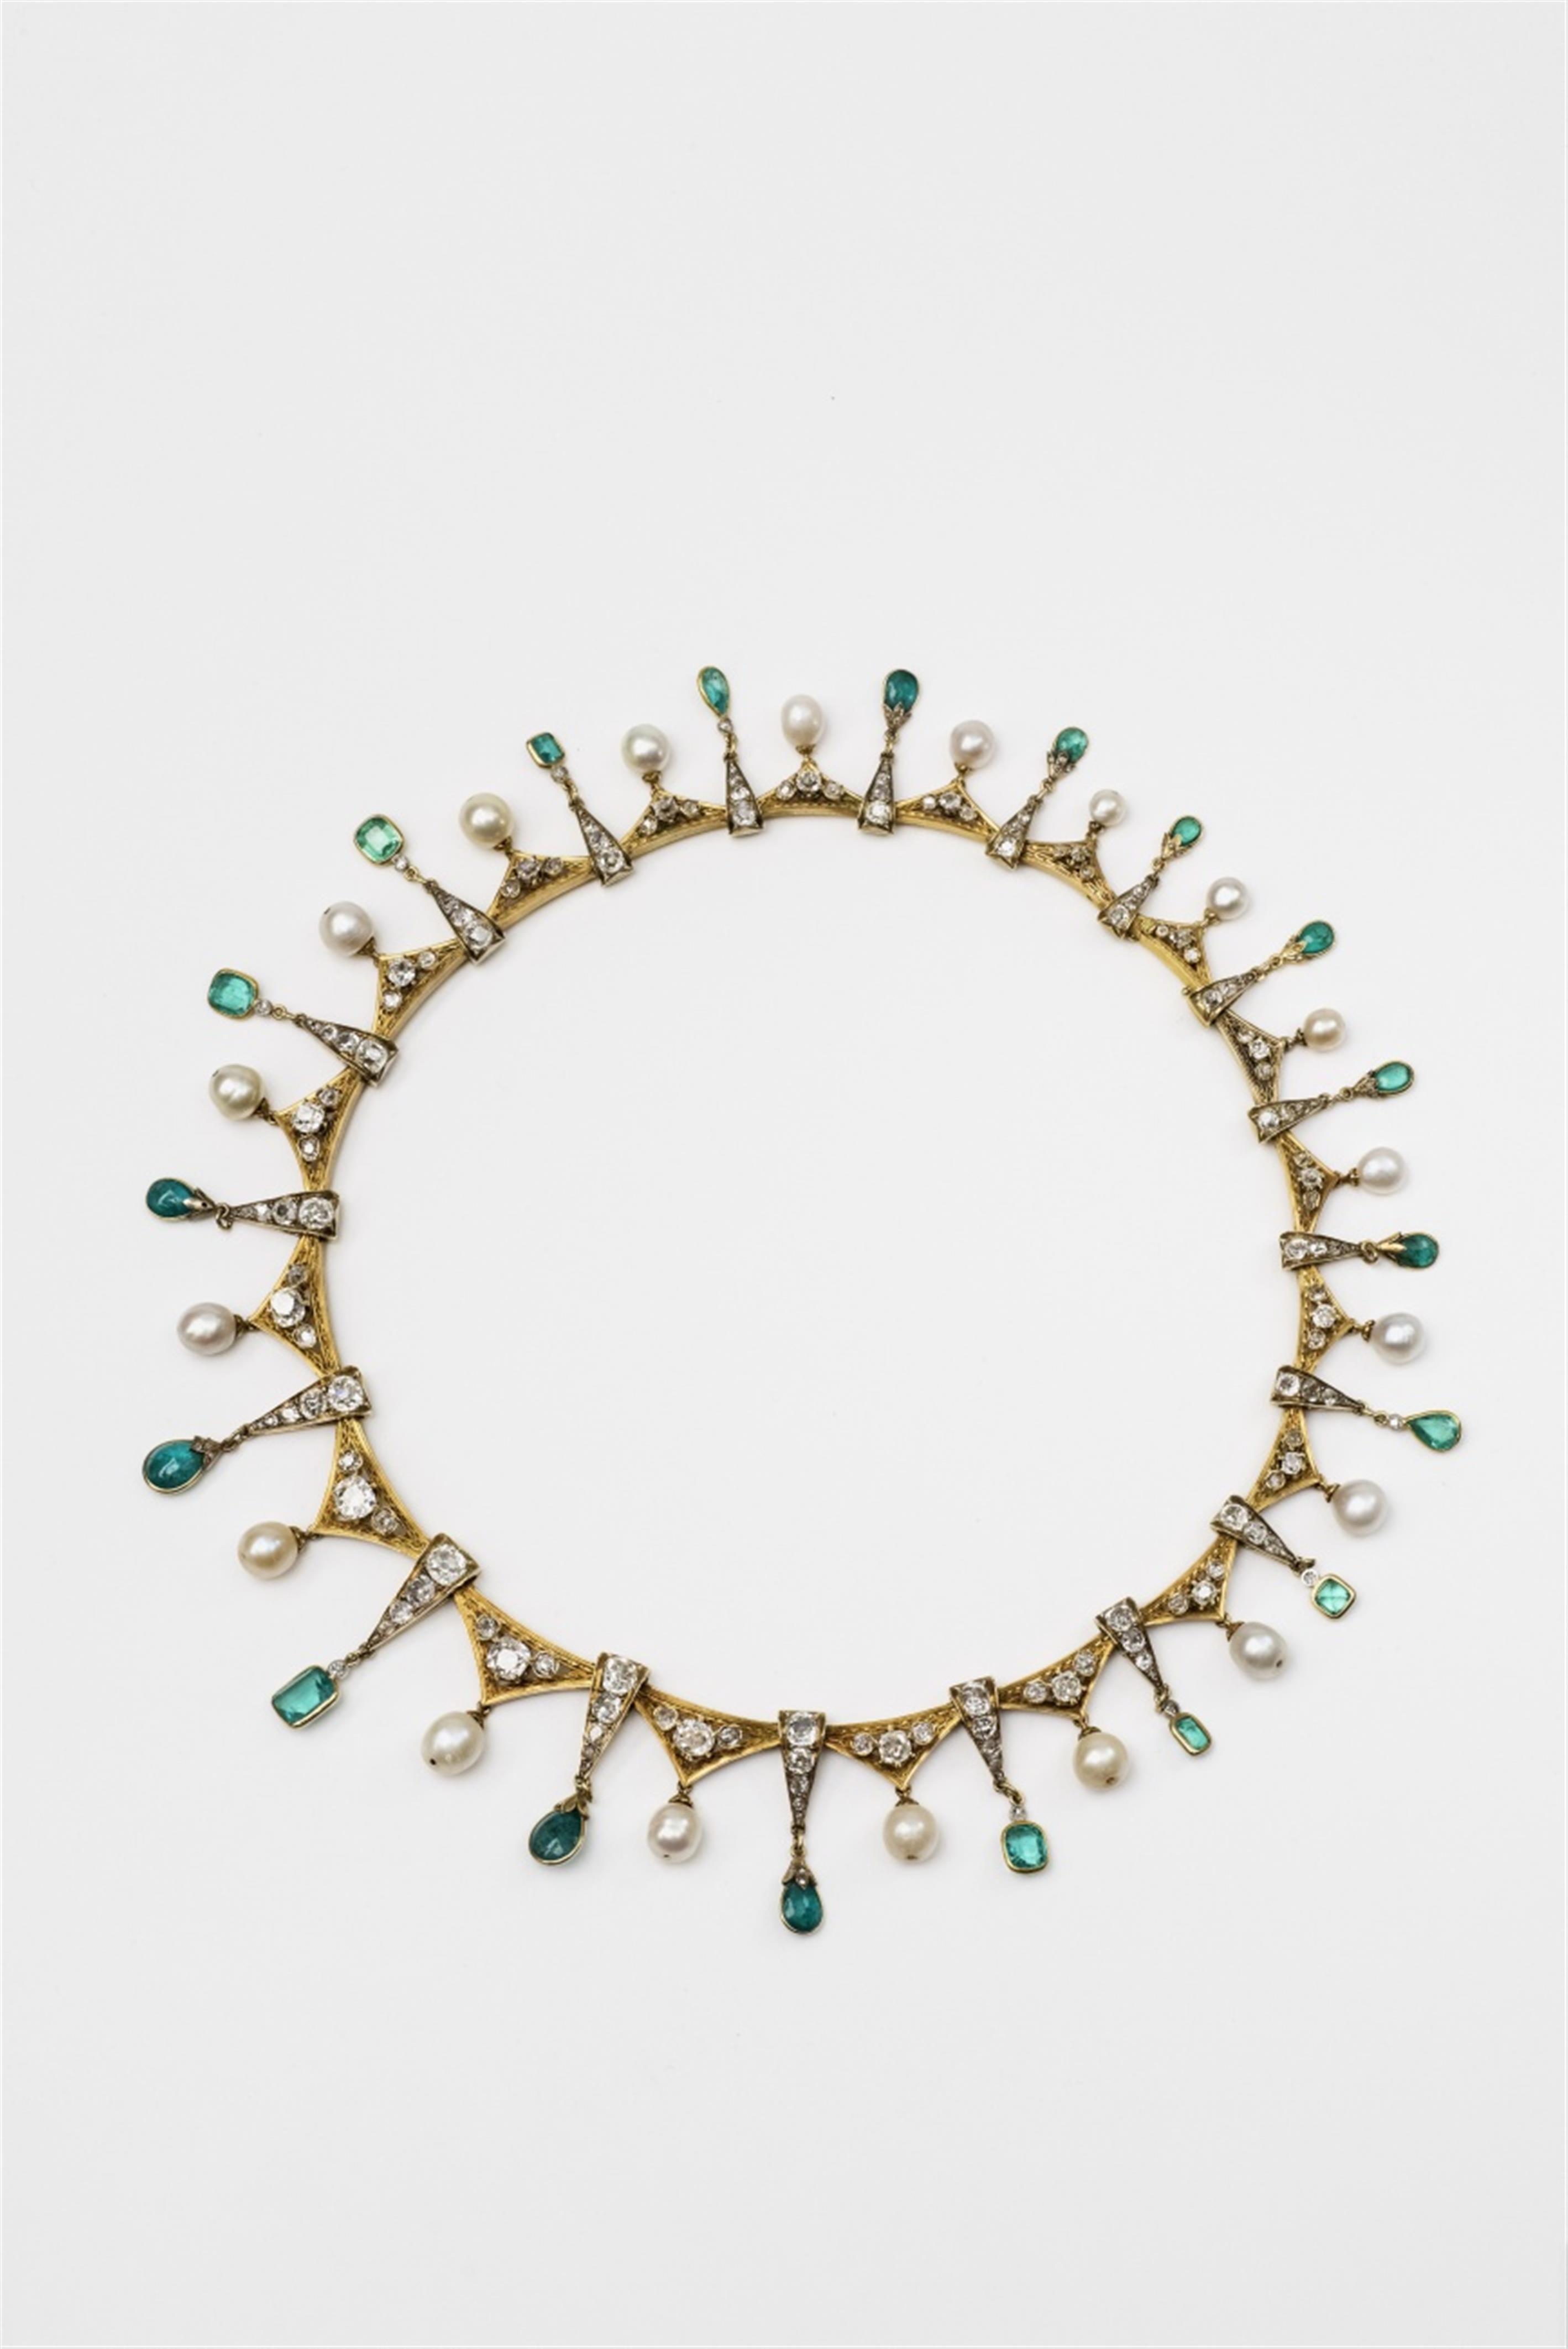 An 18k gold and emerald fringe necklace - image-1